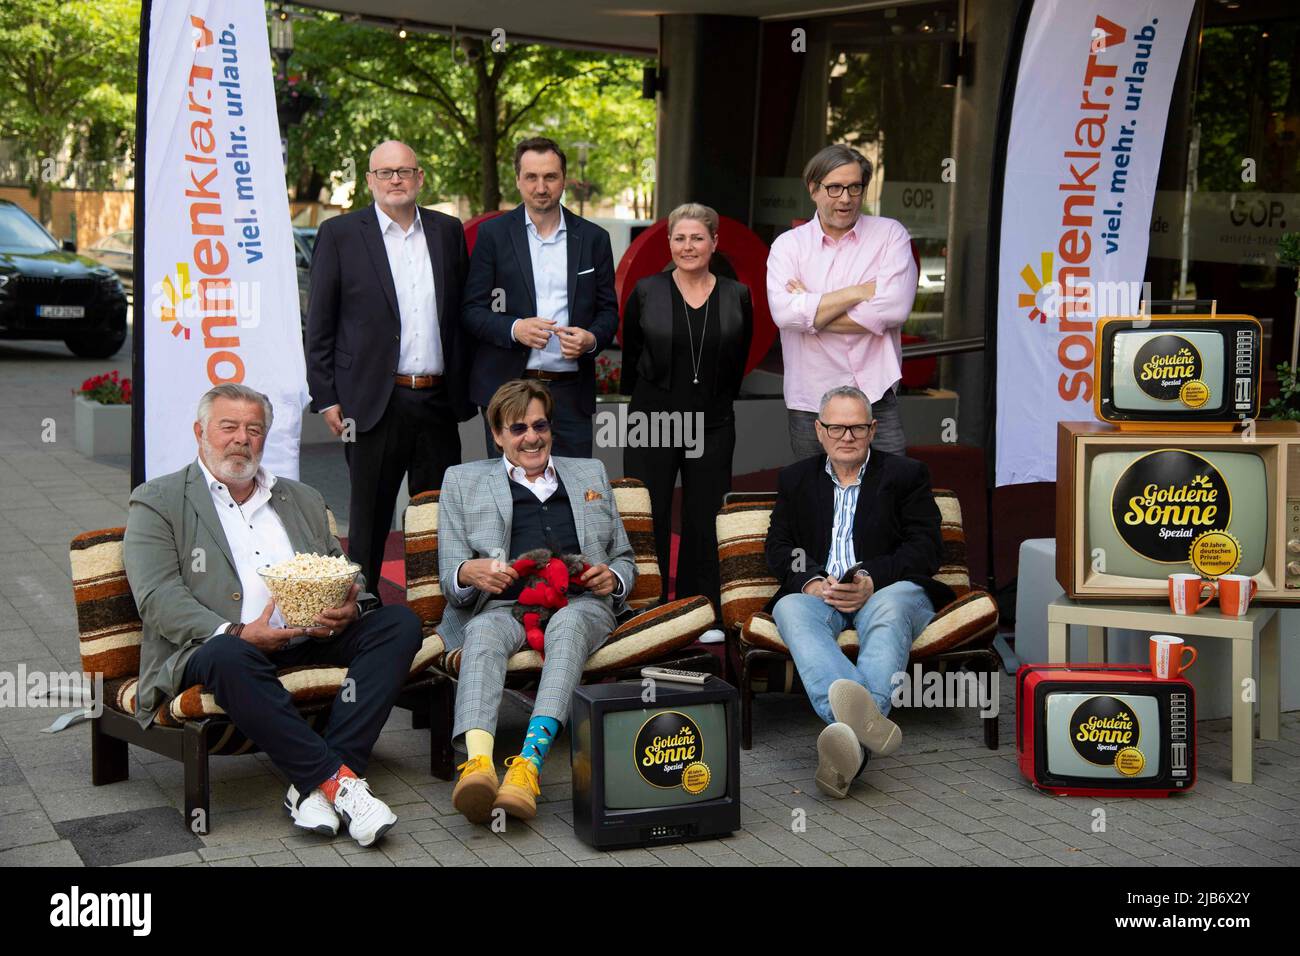 back from left: Andreas LAMBECK, managing director of sonnenklar.tv, Richard ROEHRHOFF, RÃ¶hrhoff, managing director of EMG Essen Marketing Gesellschaft, Nadine STOECKMANN, StÃ¶ckmann, director of GOP Variete Essen, Ruediger KONETSCHNY, musician, the radio band showact, front from left: *** Harry WIJNVOORD, presenter, Joerg DRAEGER, Jörg DrÃ ger, presenter, Ulrich Ulli POTOFSKI, presenter, press conference to present the gala on the occasion of 40 years of private television with the award ceremony Die Goldene Sonne, in the GOP Variete in Essen, 03 06 2022 Â Stock Photo